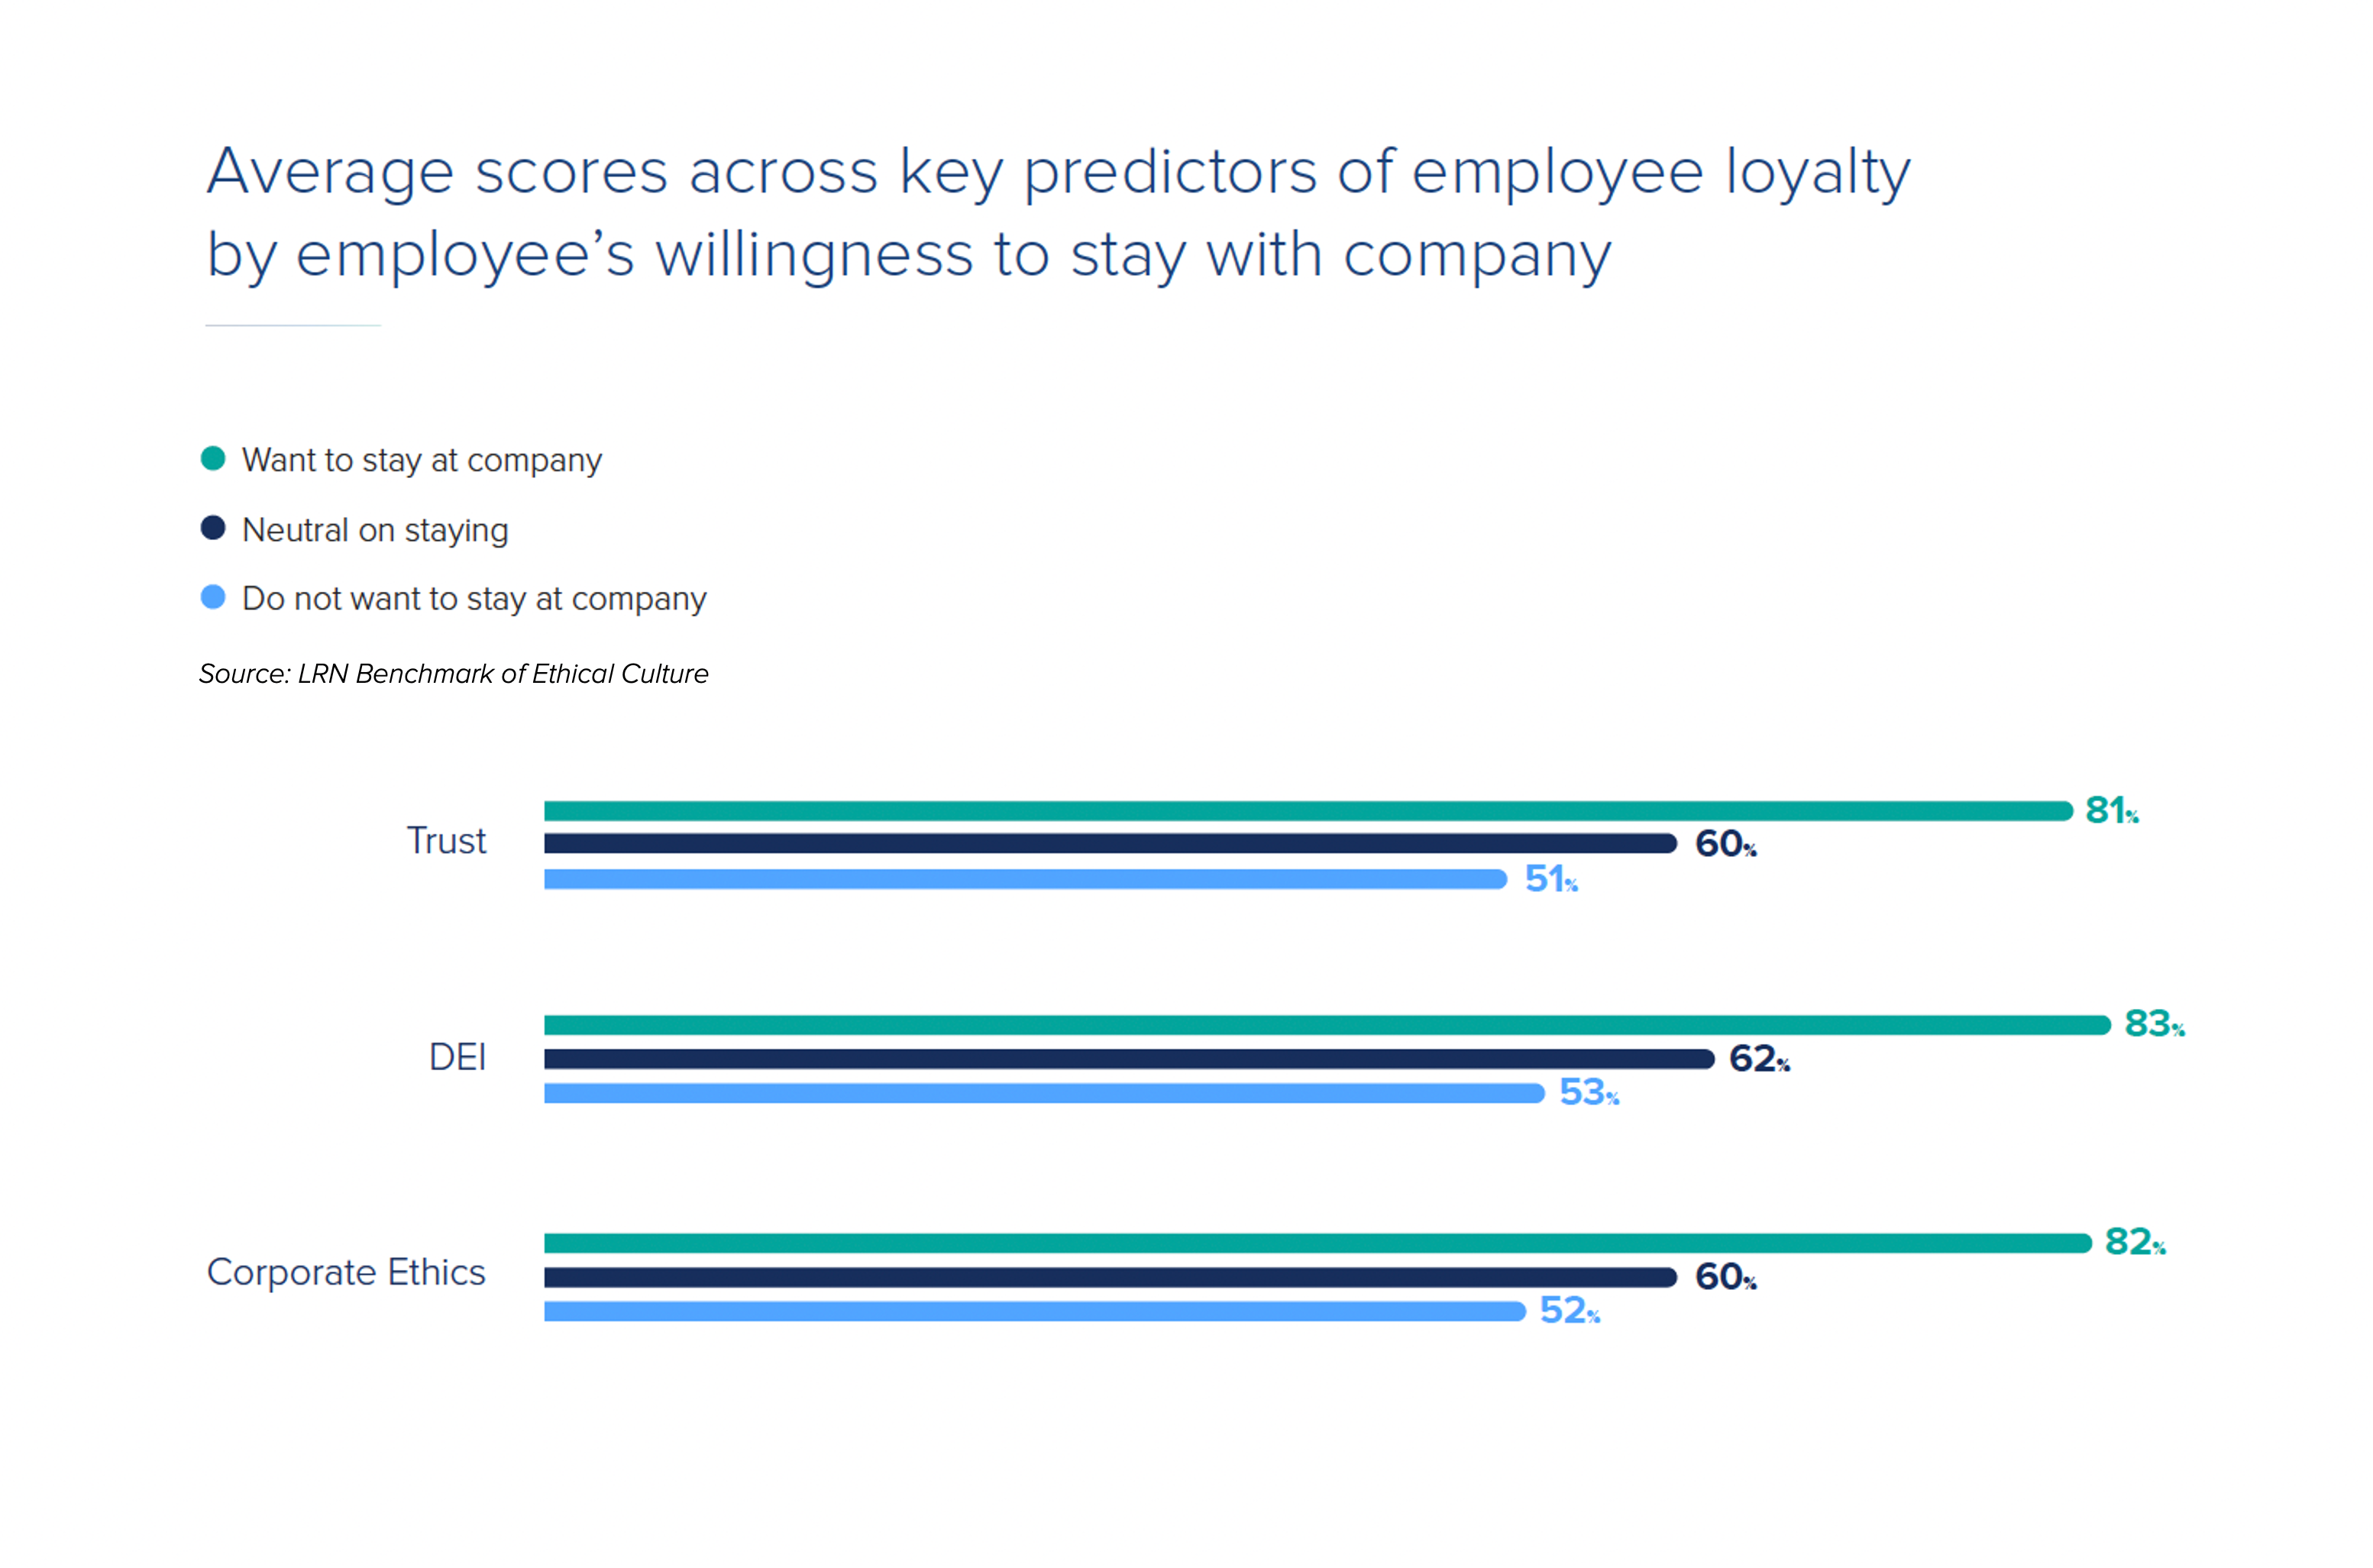 LRN Benchmark of Ethical Culture chart showing that trust, ethics, and DEI influence employee loyalty